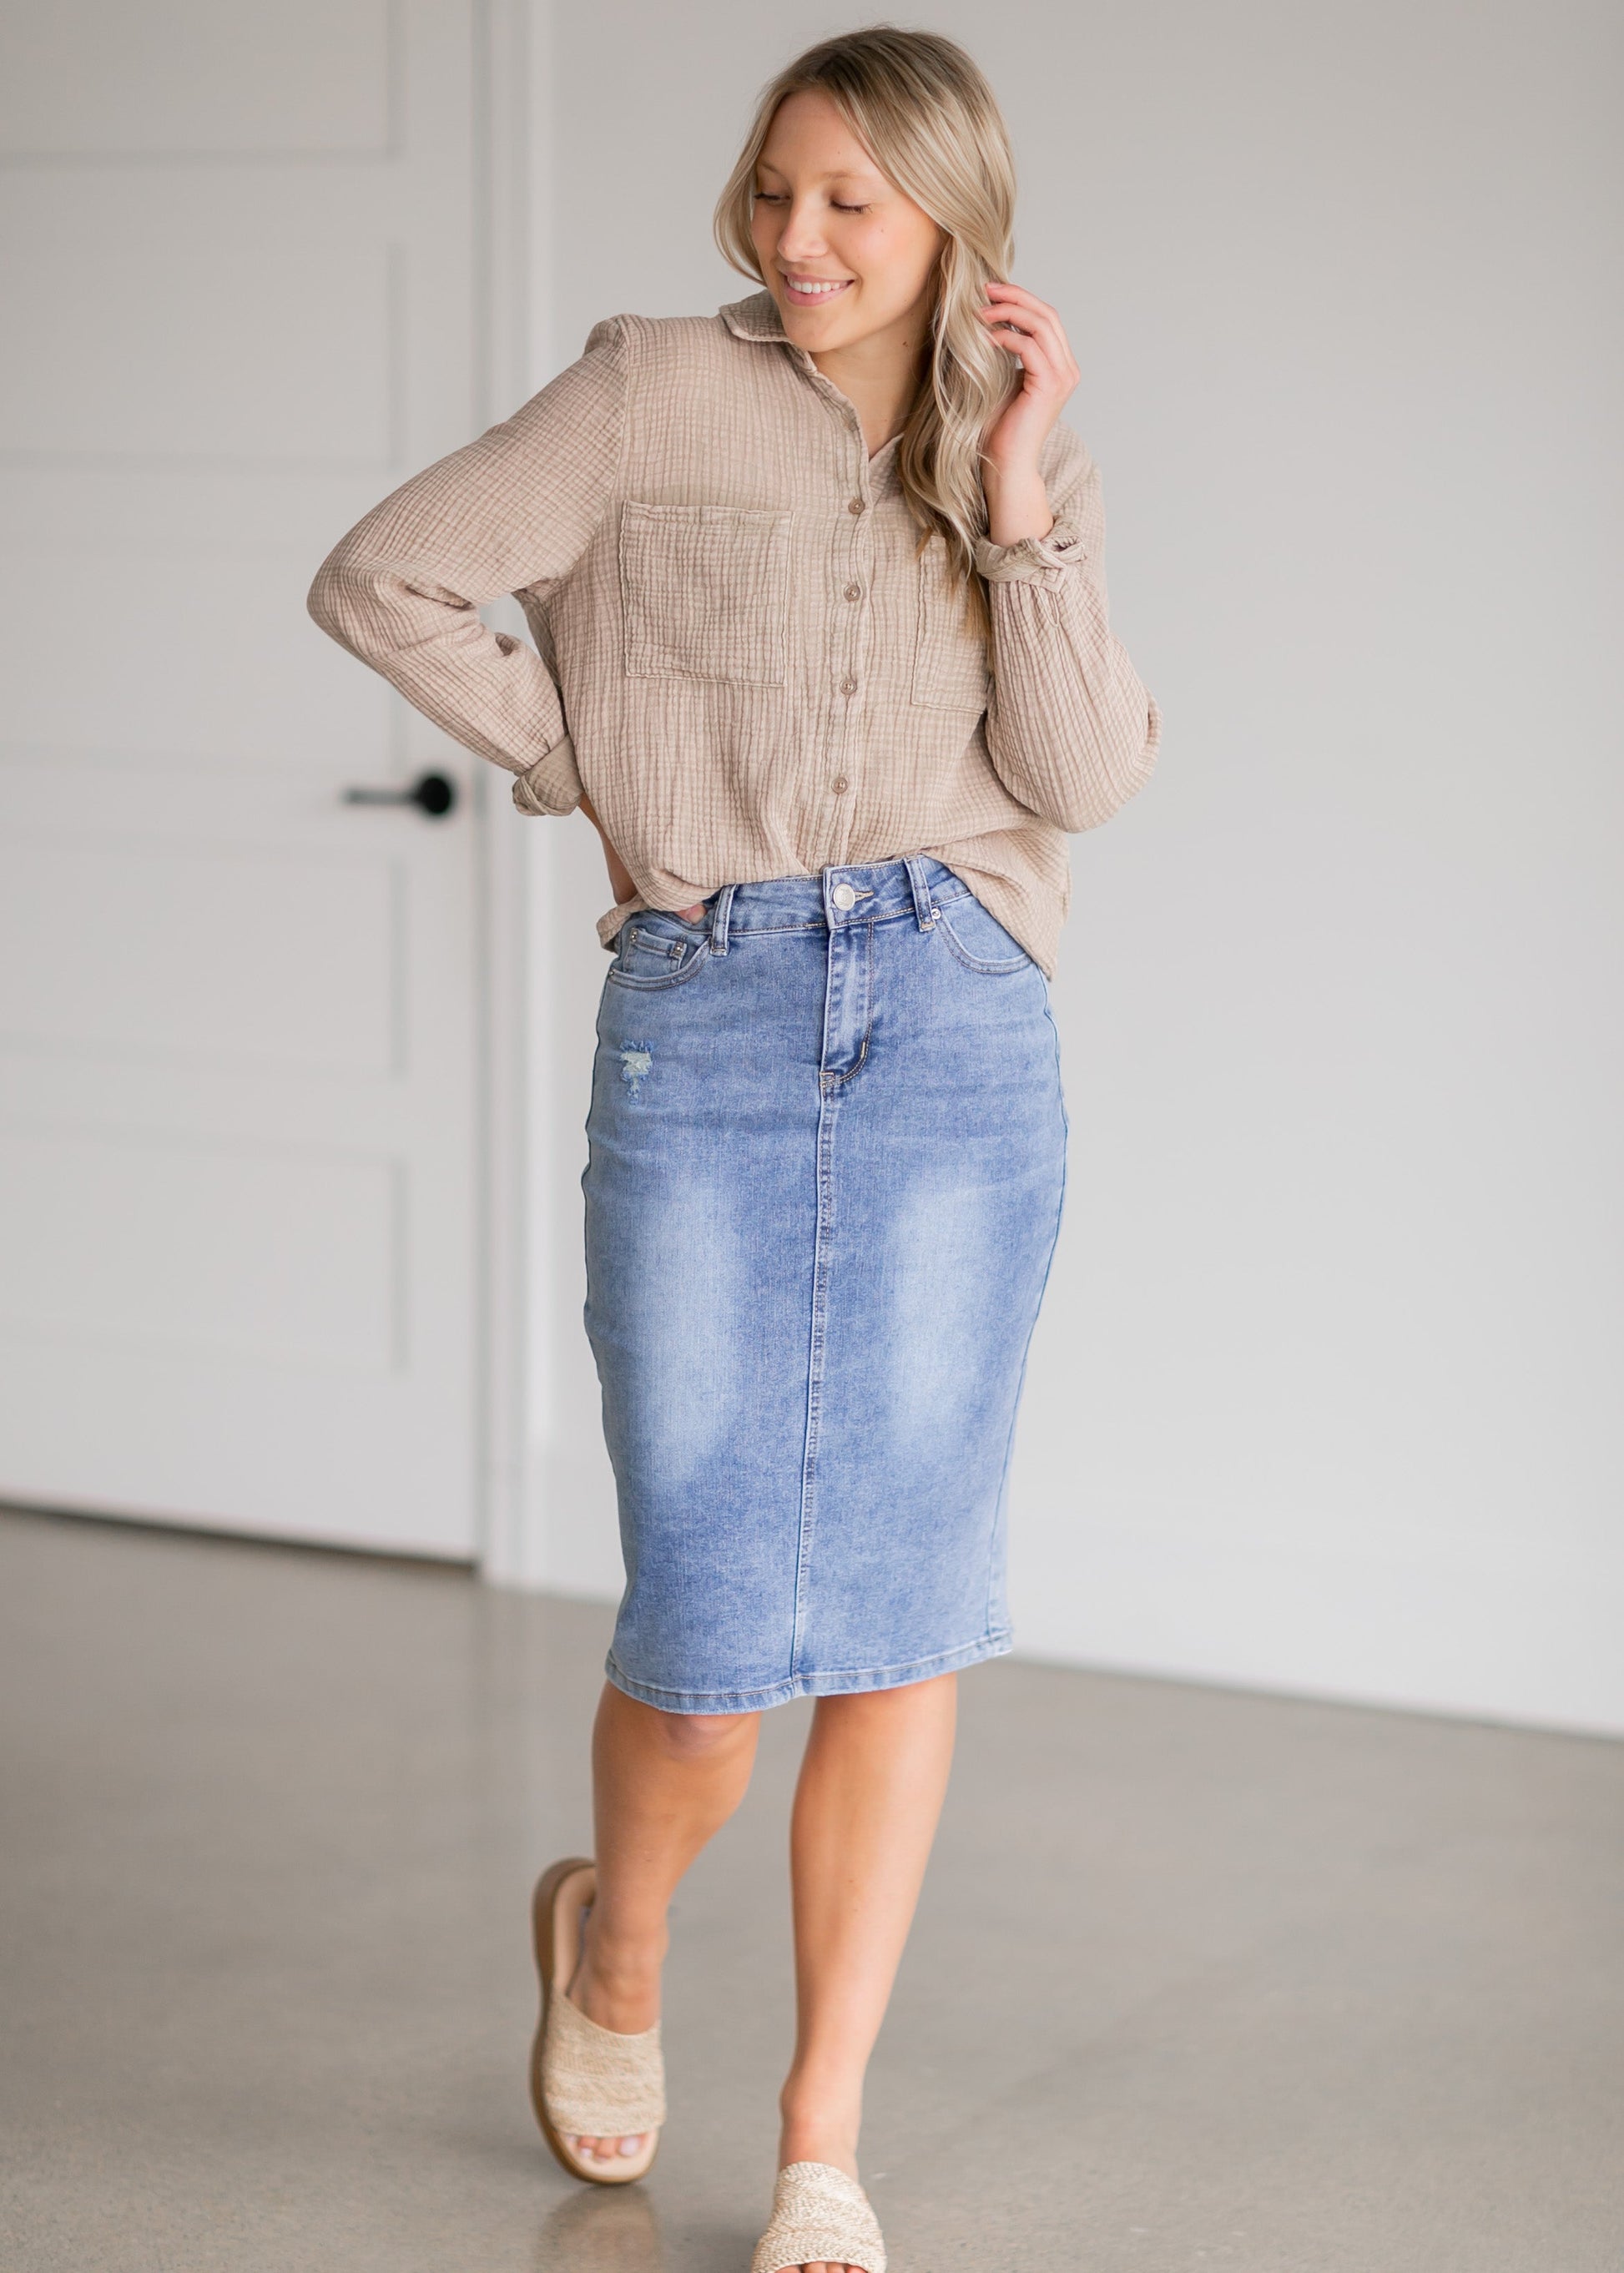 Cute Denim Skirt Outfit Ideas To Copy (Fall Summer), 58% OFF